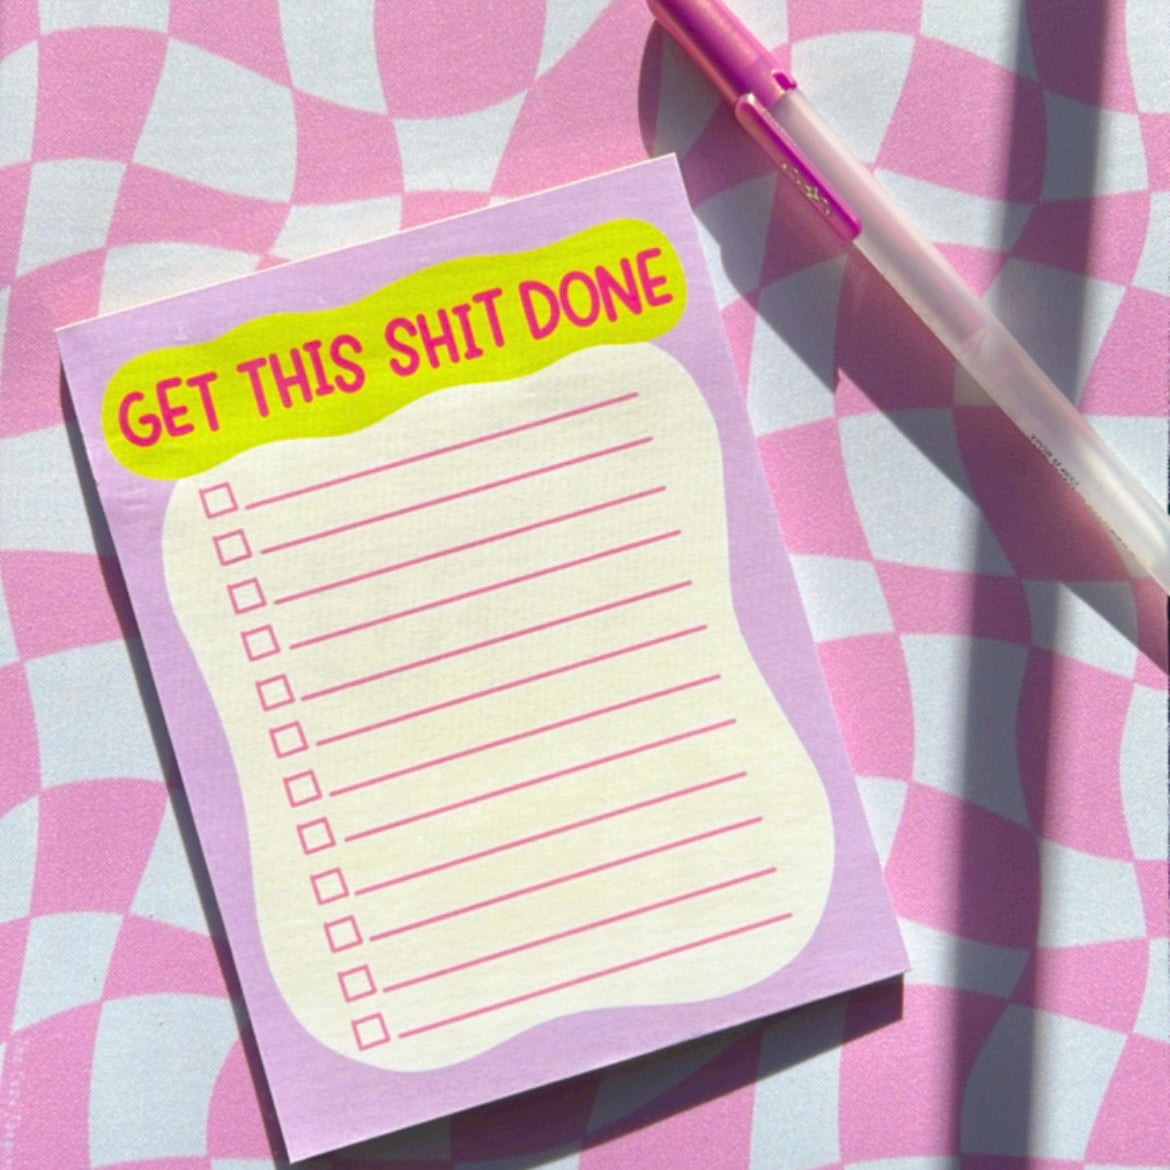 get this shit done checklist notepad. cute and fun stationery